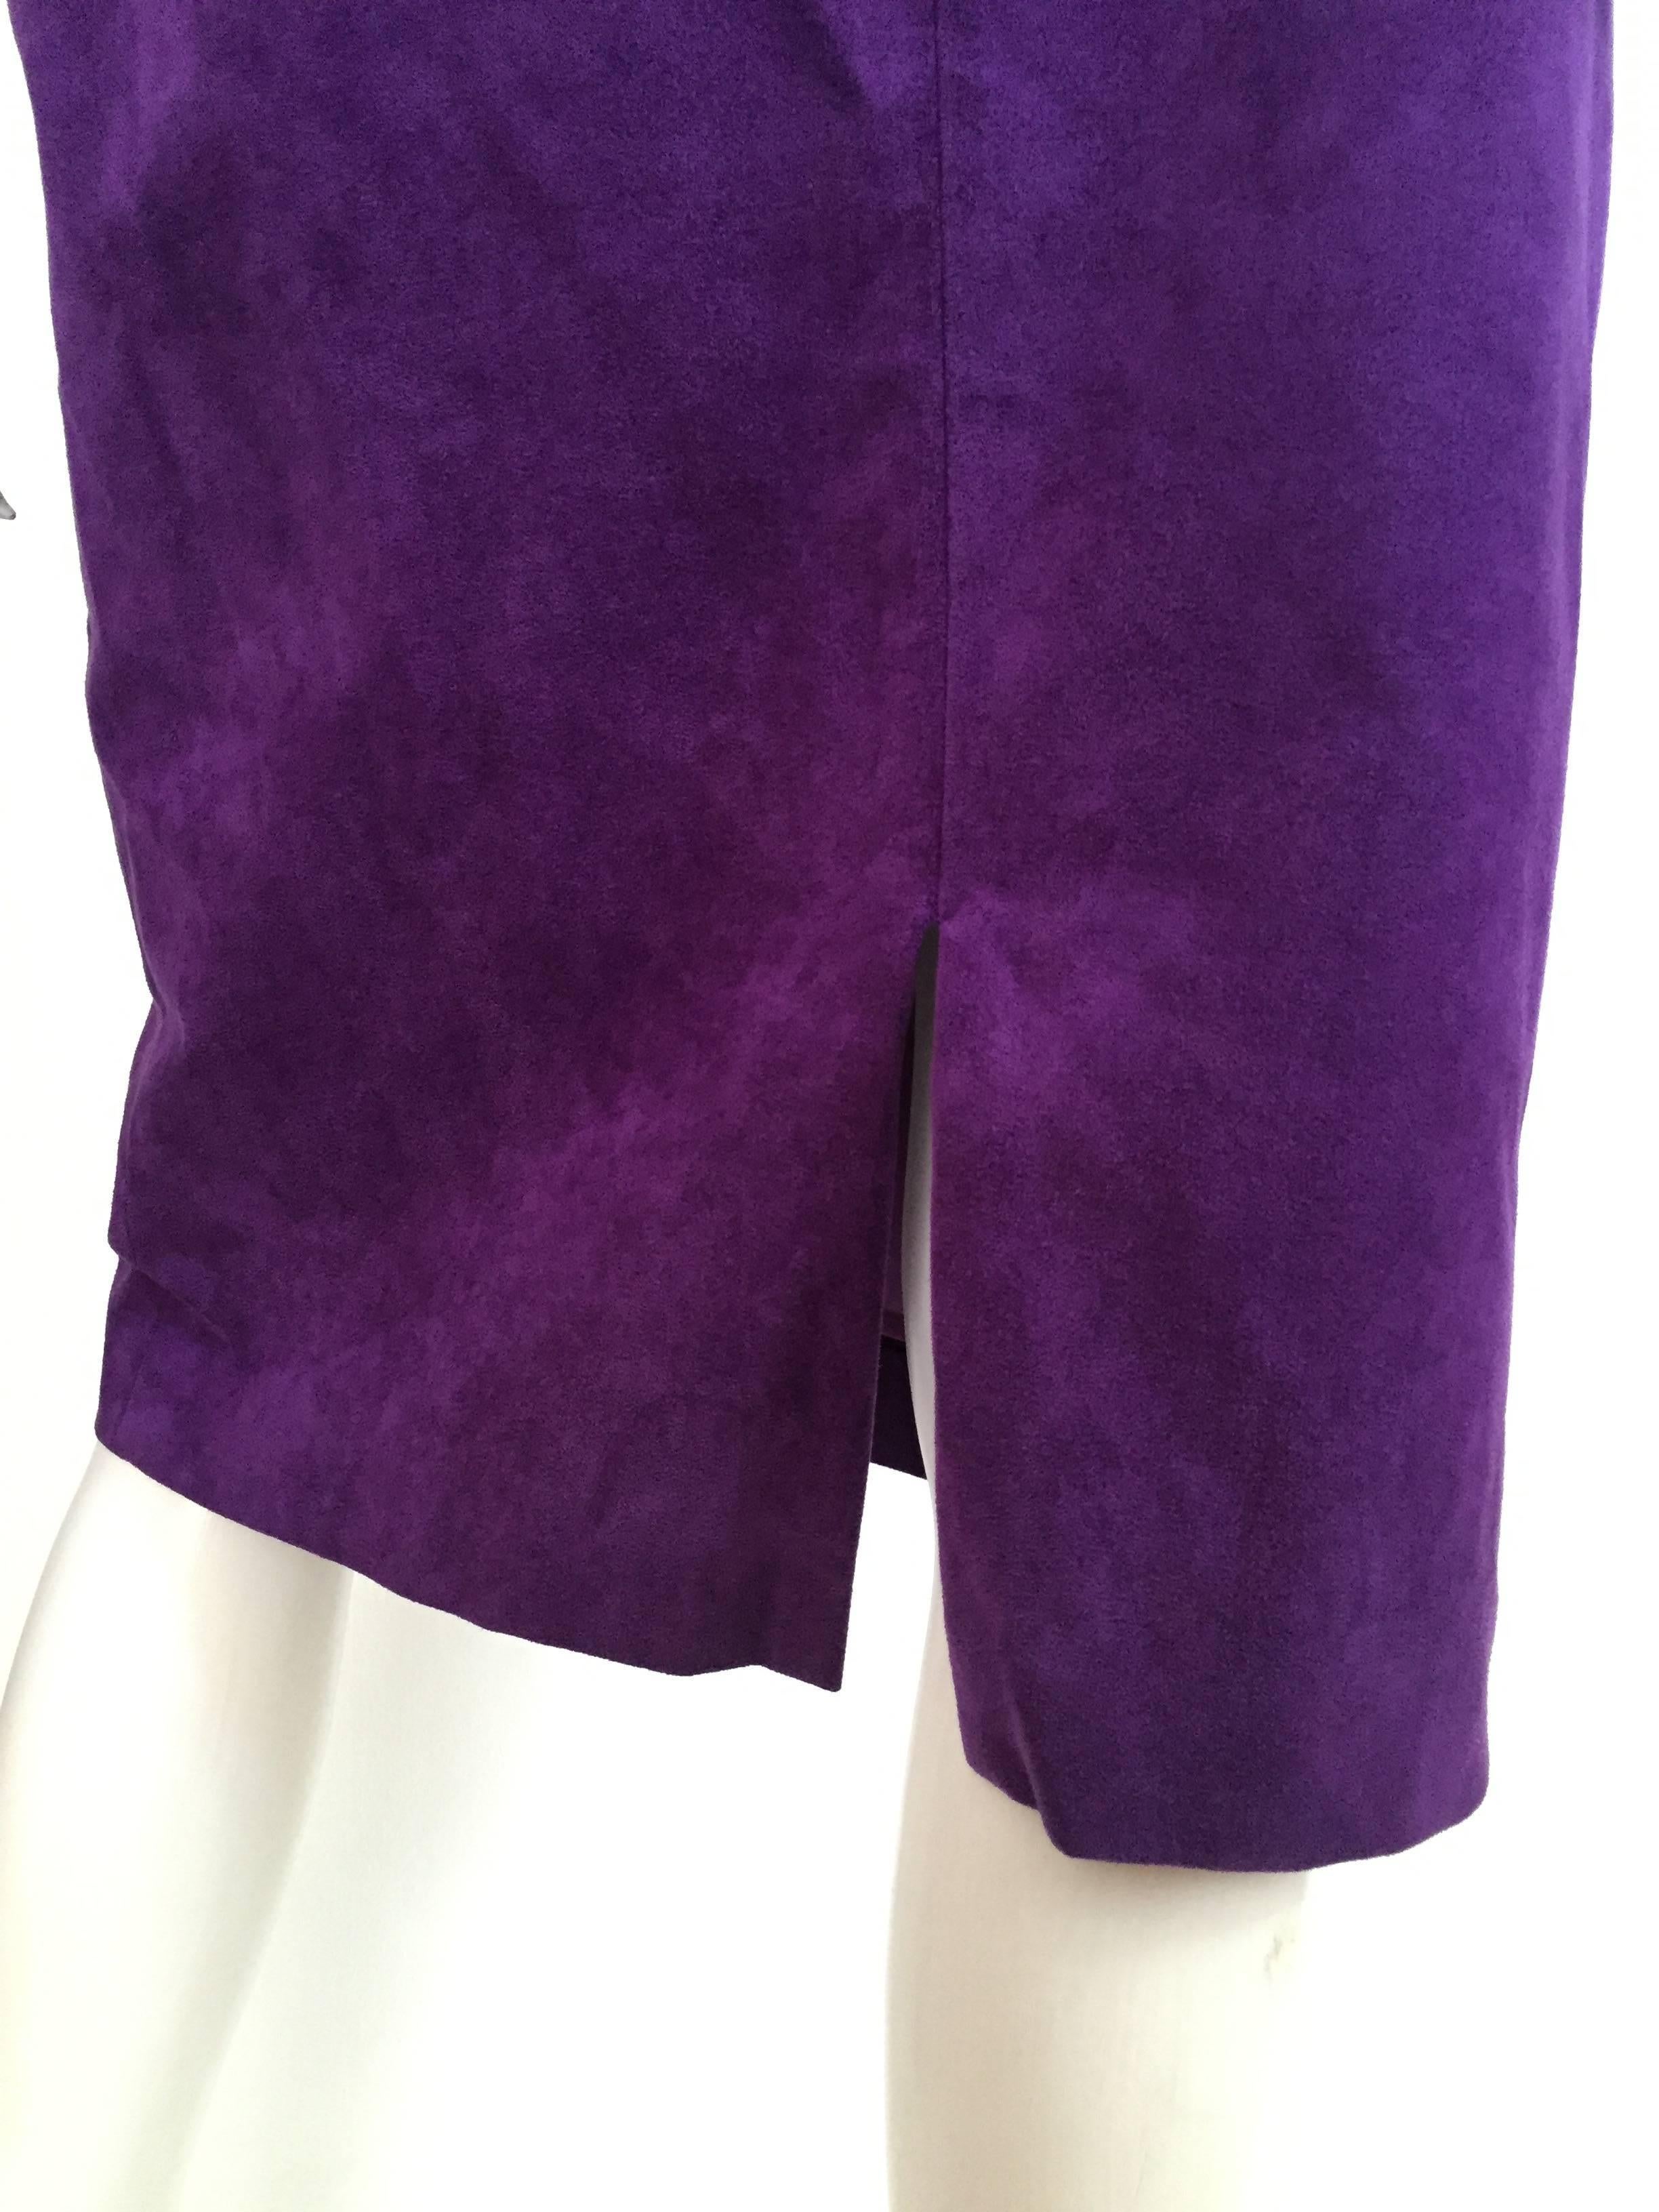 Lilli Ann 1970s Violet Ultra Suede Skirt Suit Size 6   For Sale 1